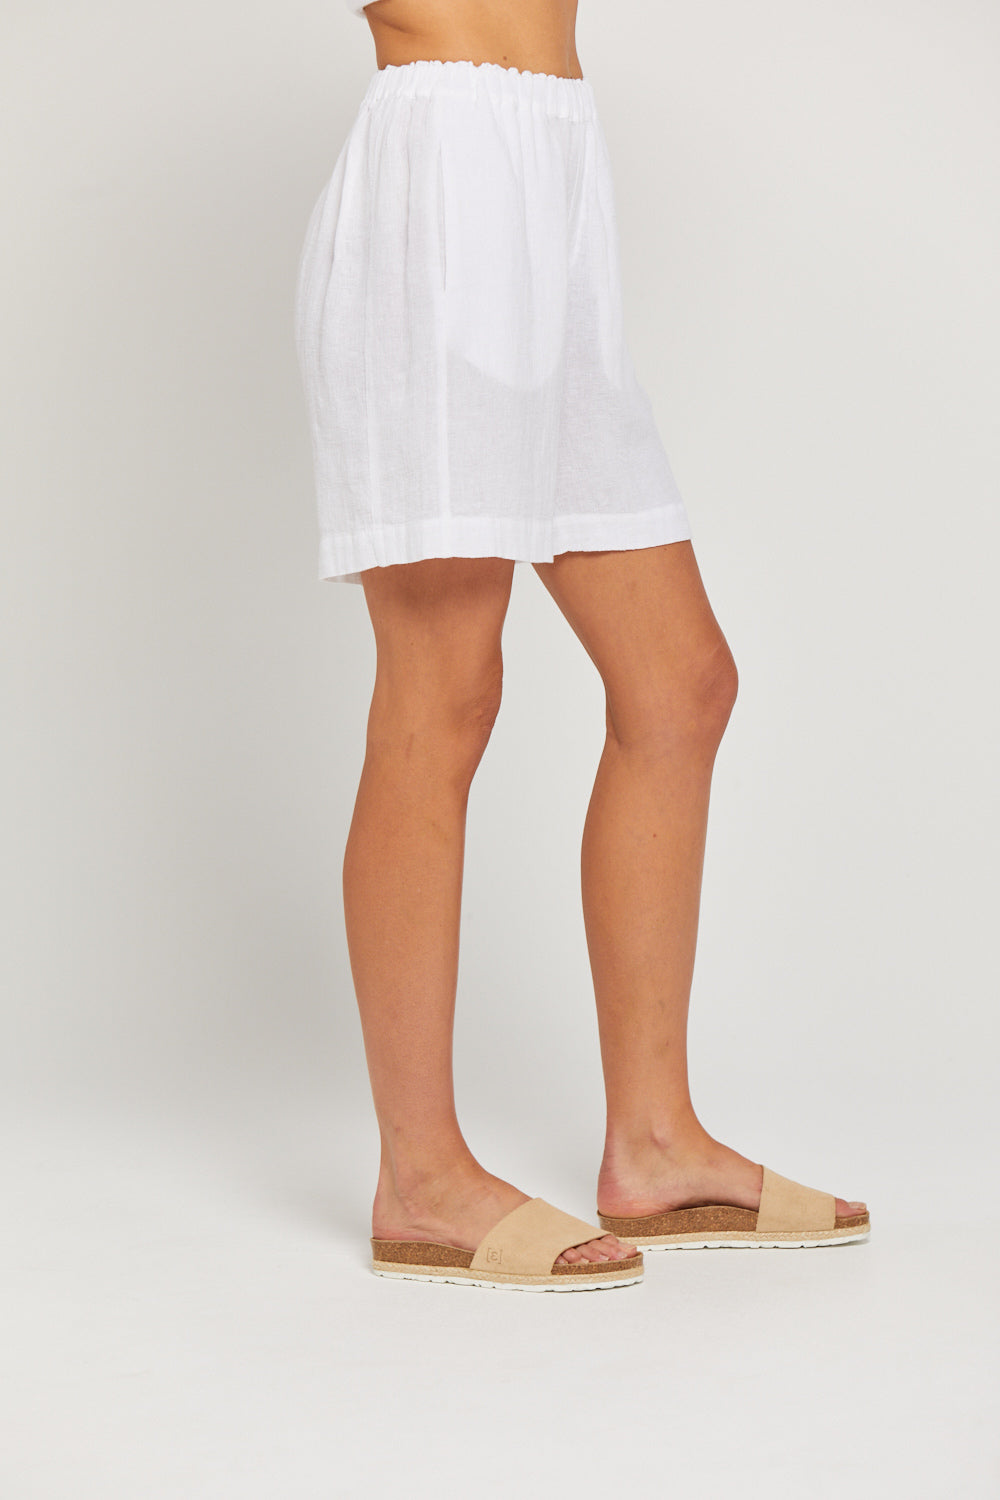 Parallel Culture Shoes and Fashion Online SHORTS BY RIDLEY GRETA SHORT